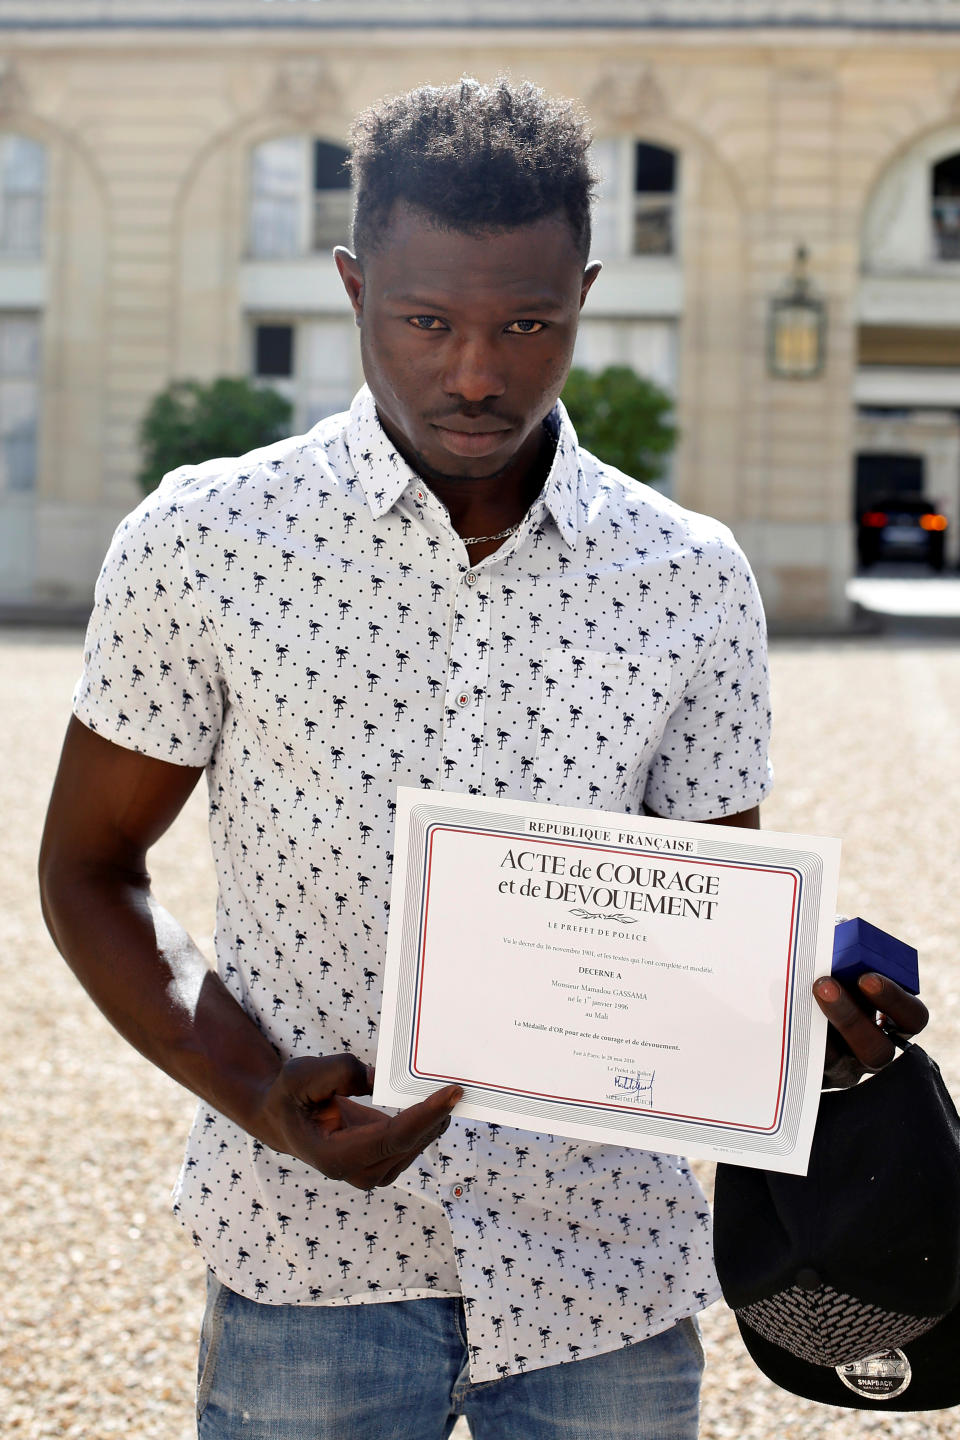 Mr Gassama’s bravery was recognised in a meeting with the French president. Source: Reuters